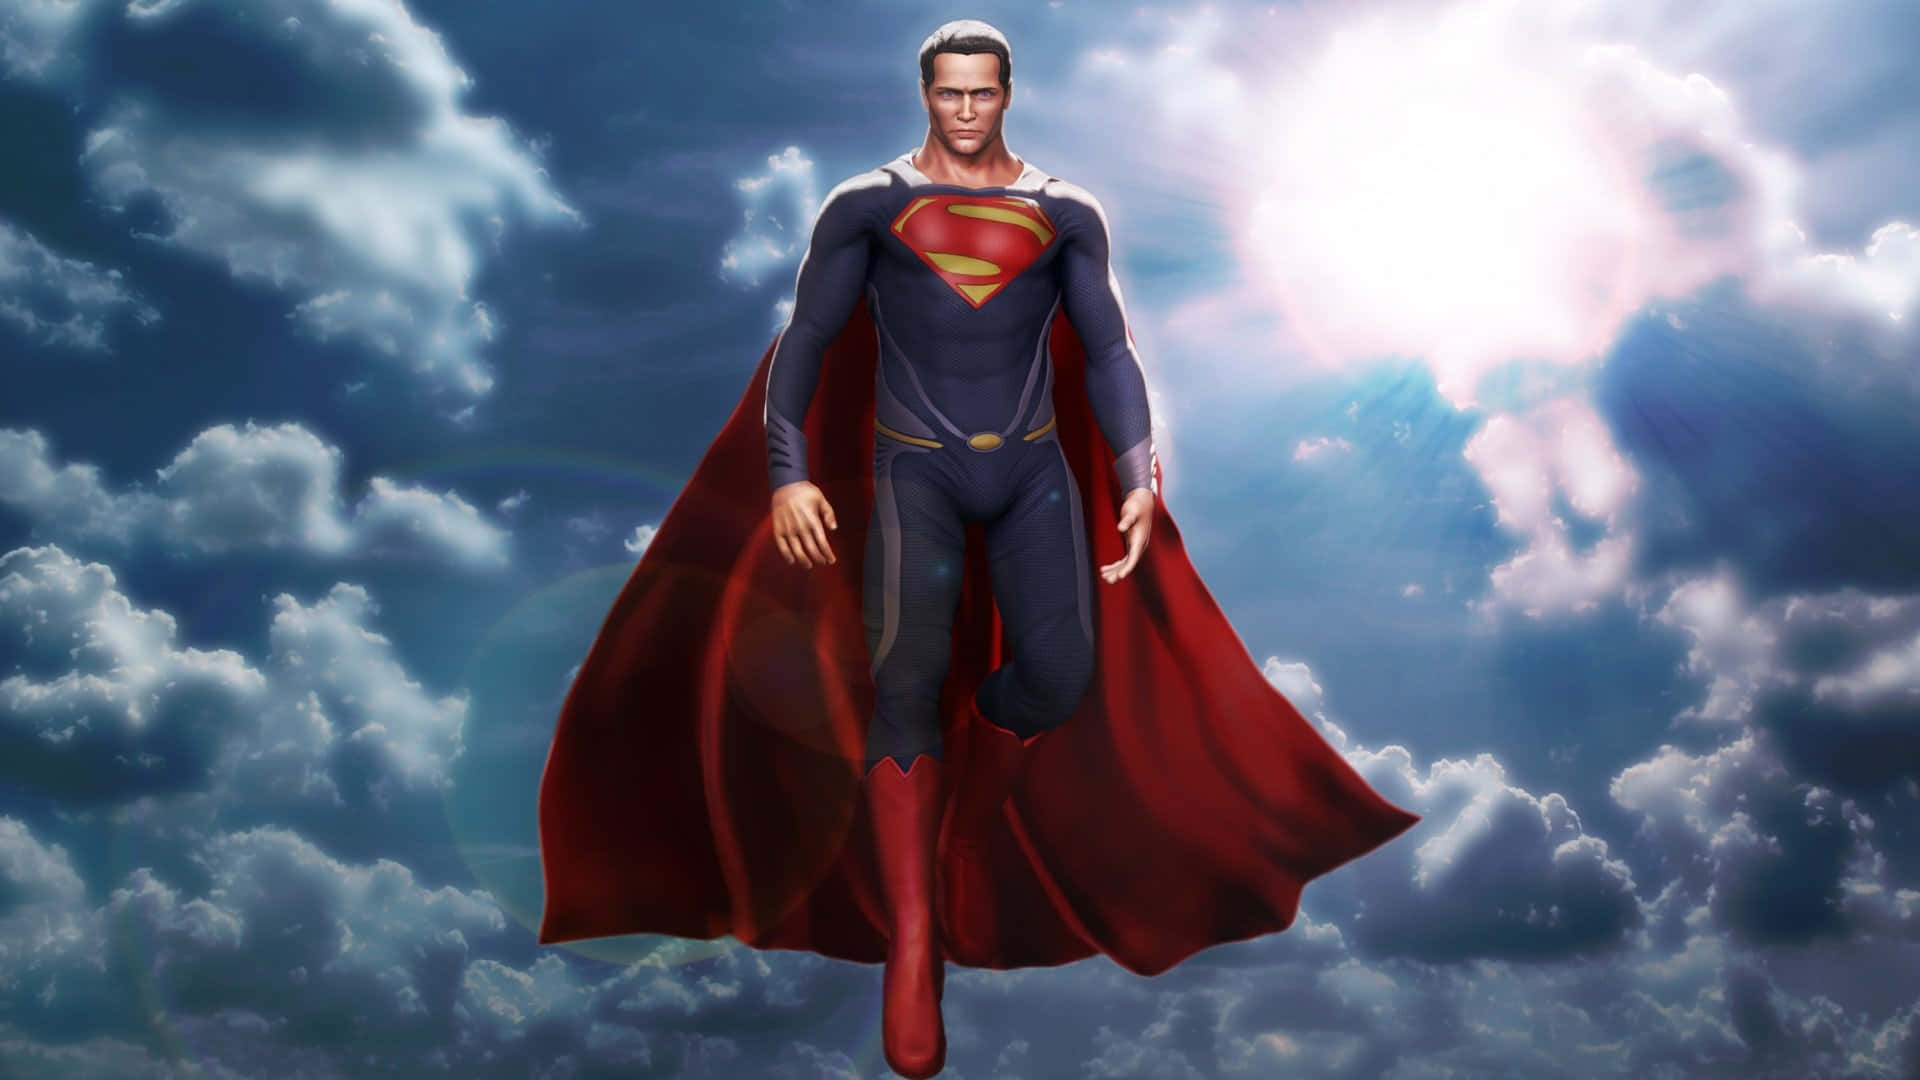 Superman In The Sky With Clouds